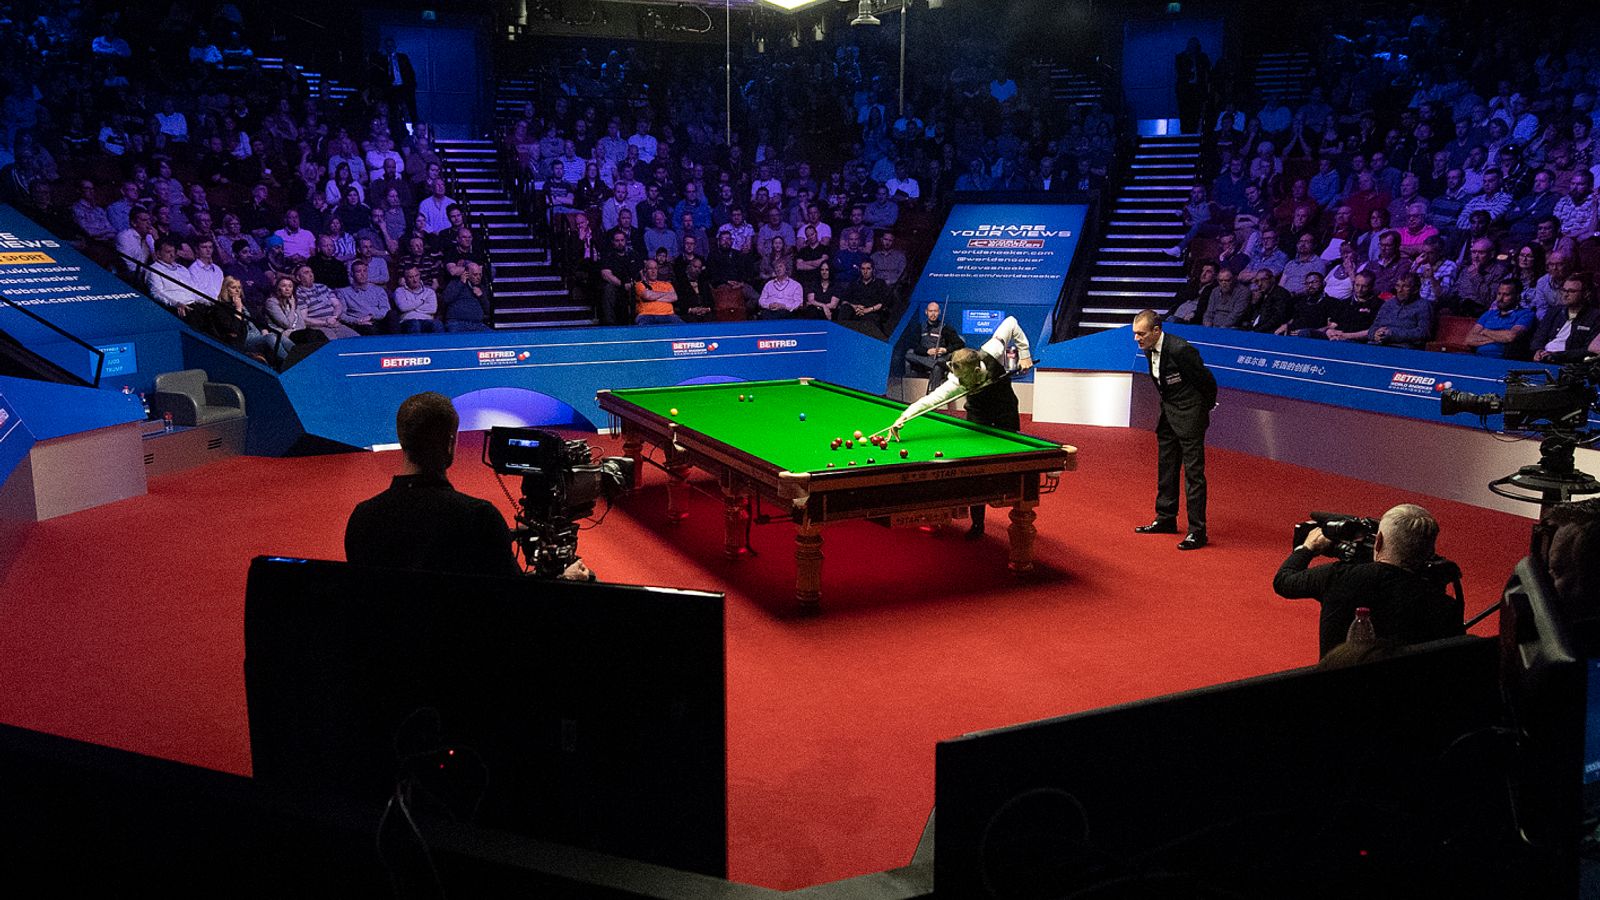 Snooker Full capacity at Crucible Theatre for 2021 World Snooker